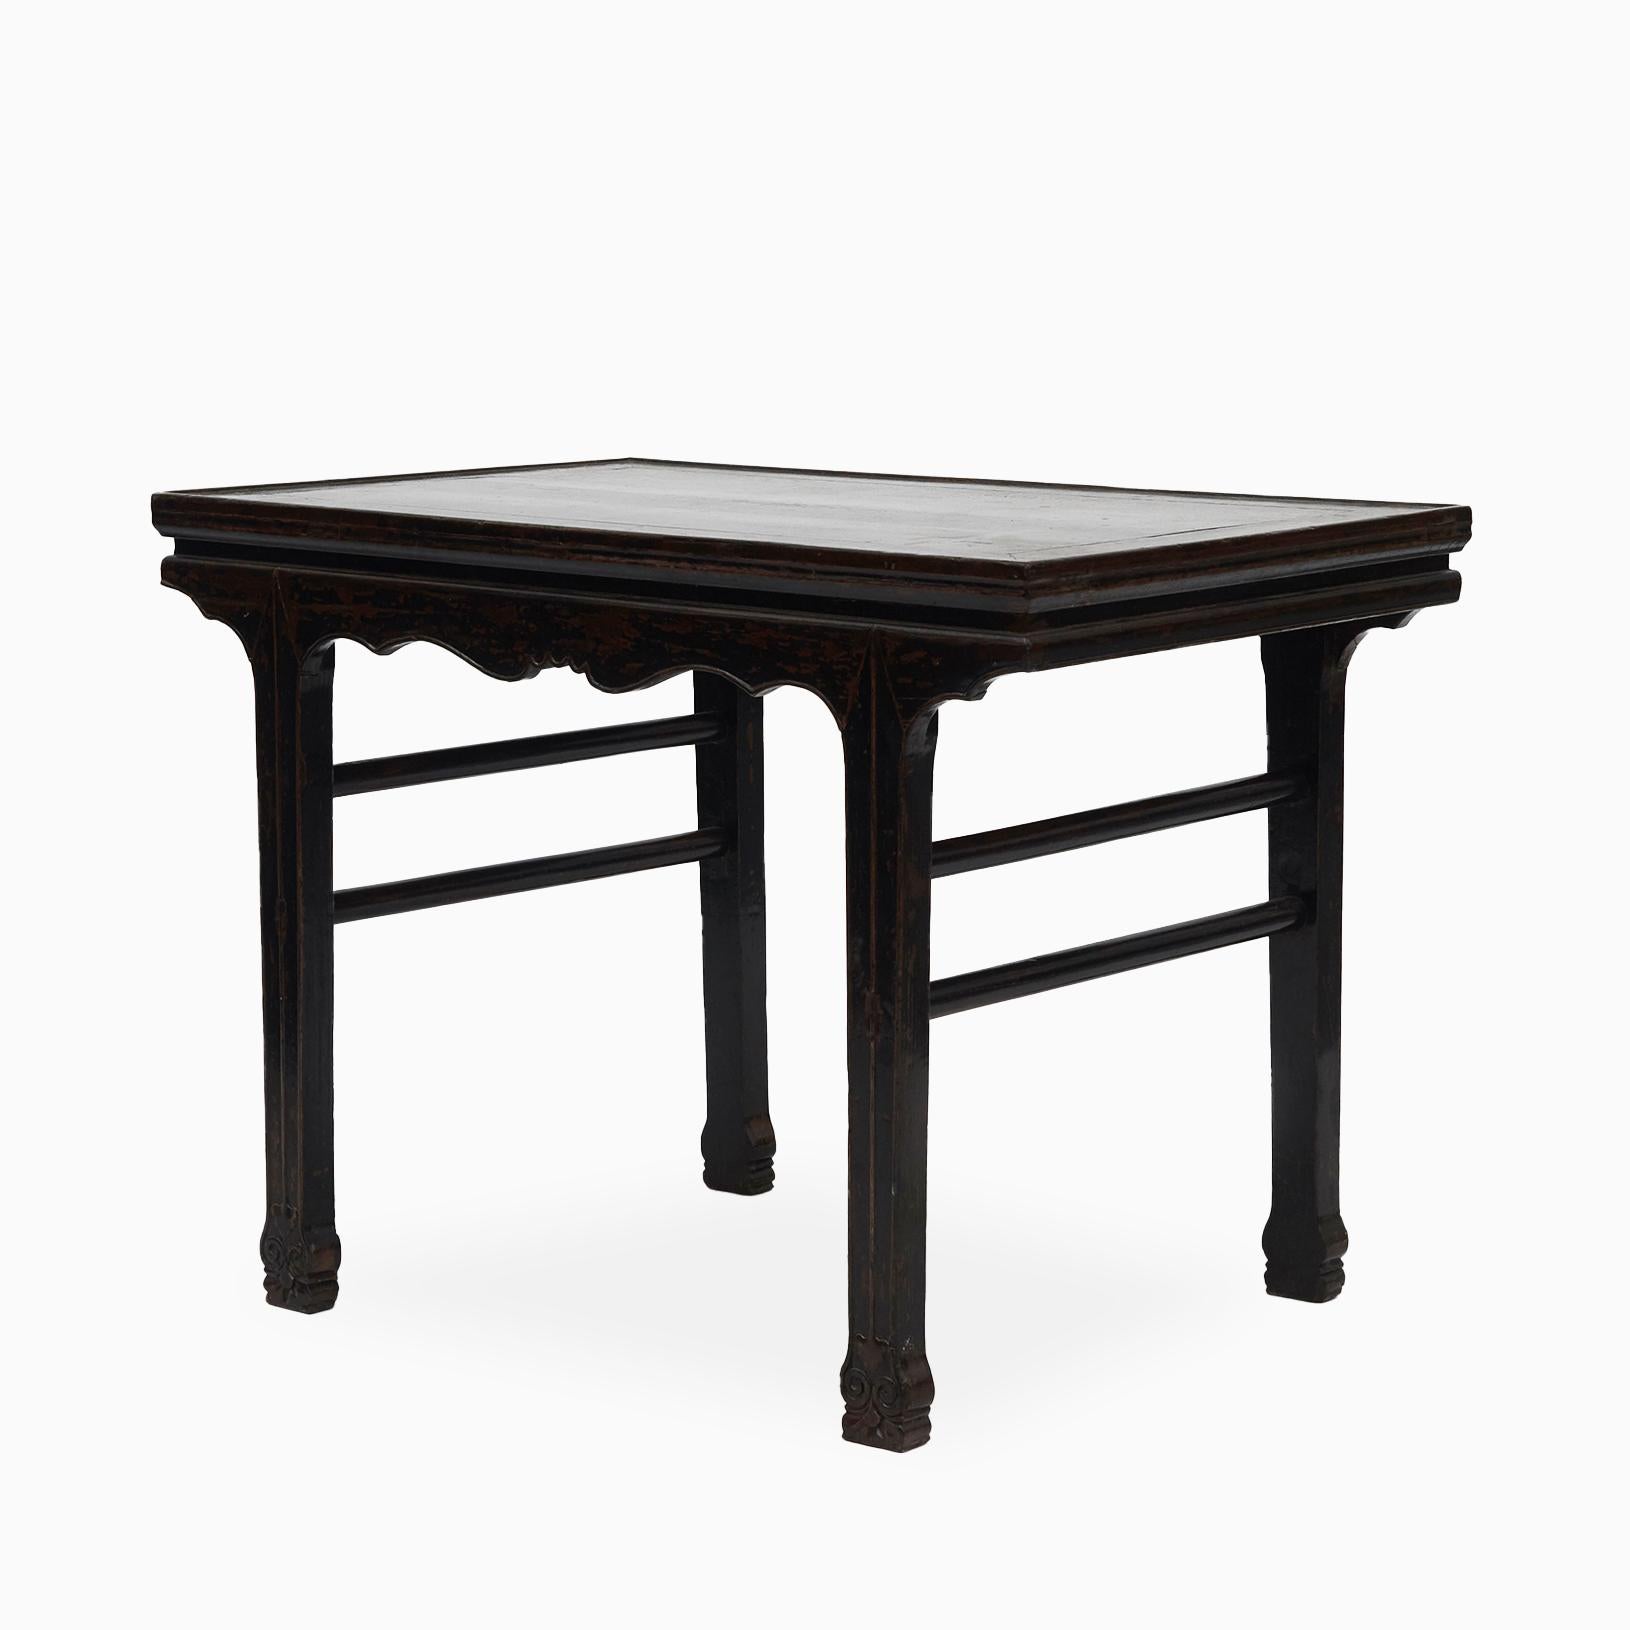 Antique 18th century Chinese wine table in black lacquer.
Tabletop with black lacquered canvas sitting above an elegant apron accented with carved spandrels. The tabletop is covered with canvas, as the original thick black lacquer only would fasten